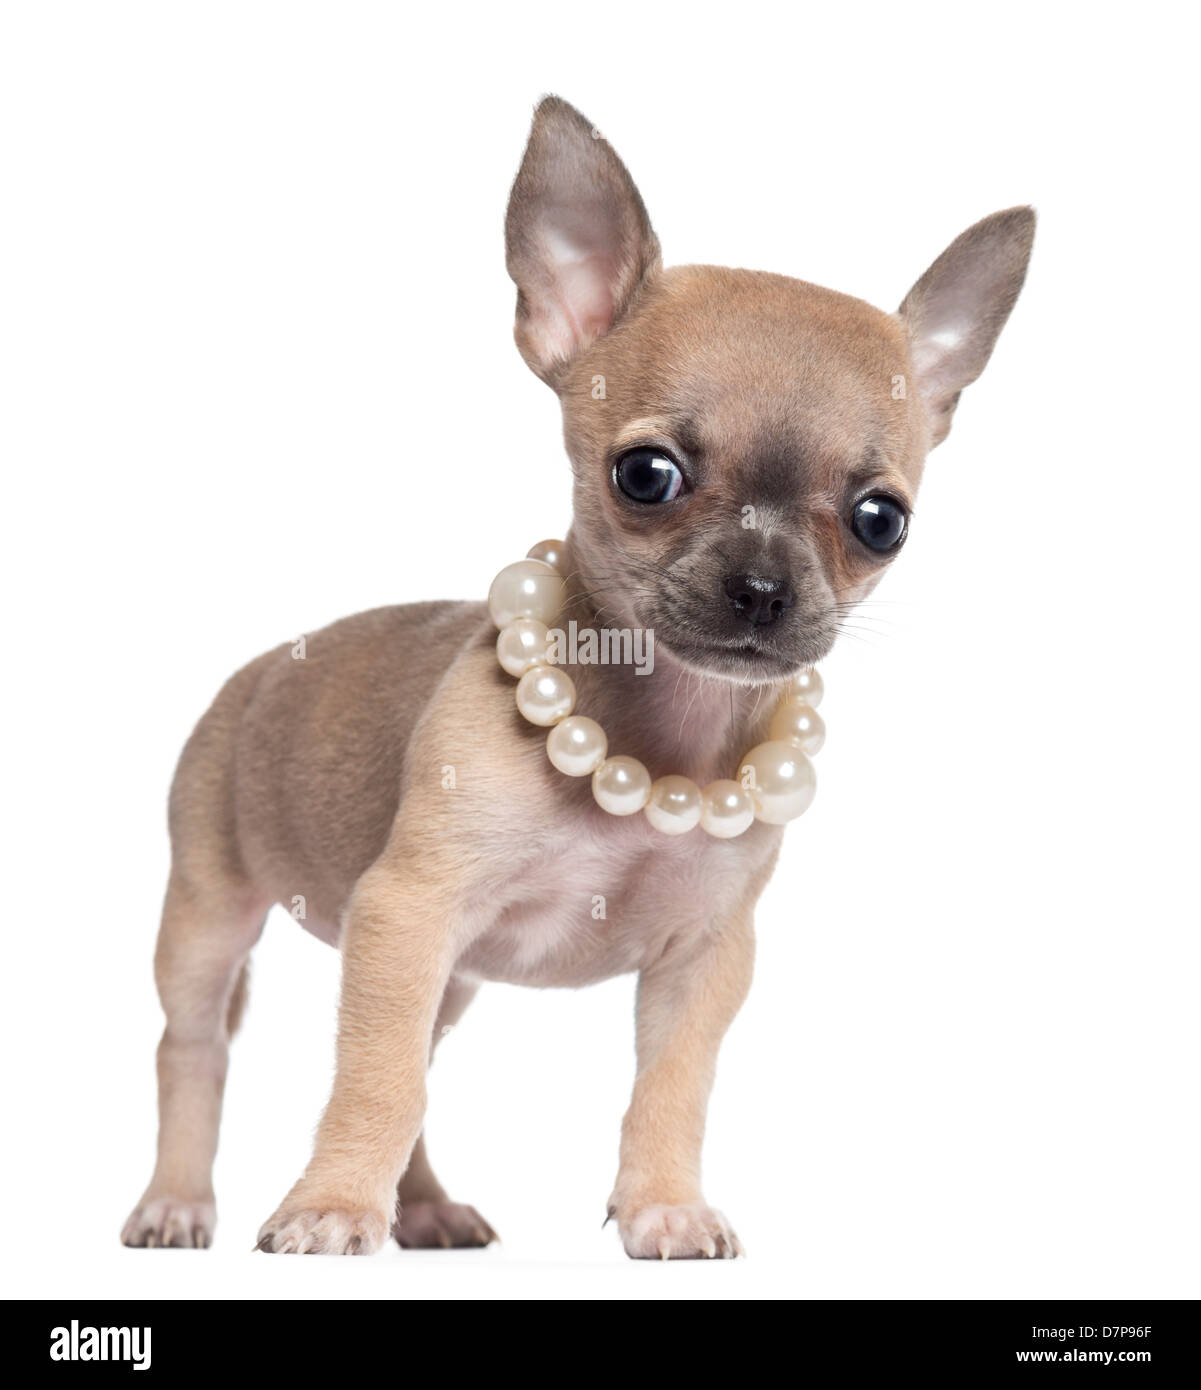 Chihuahua puppy, 4 months old, wearing a pearl necklace and looking at the camera against white background Stock Photo